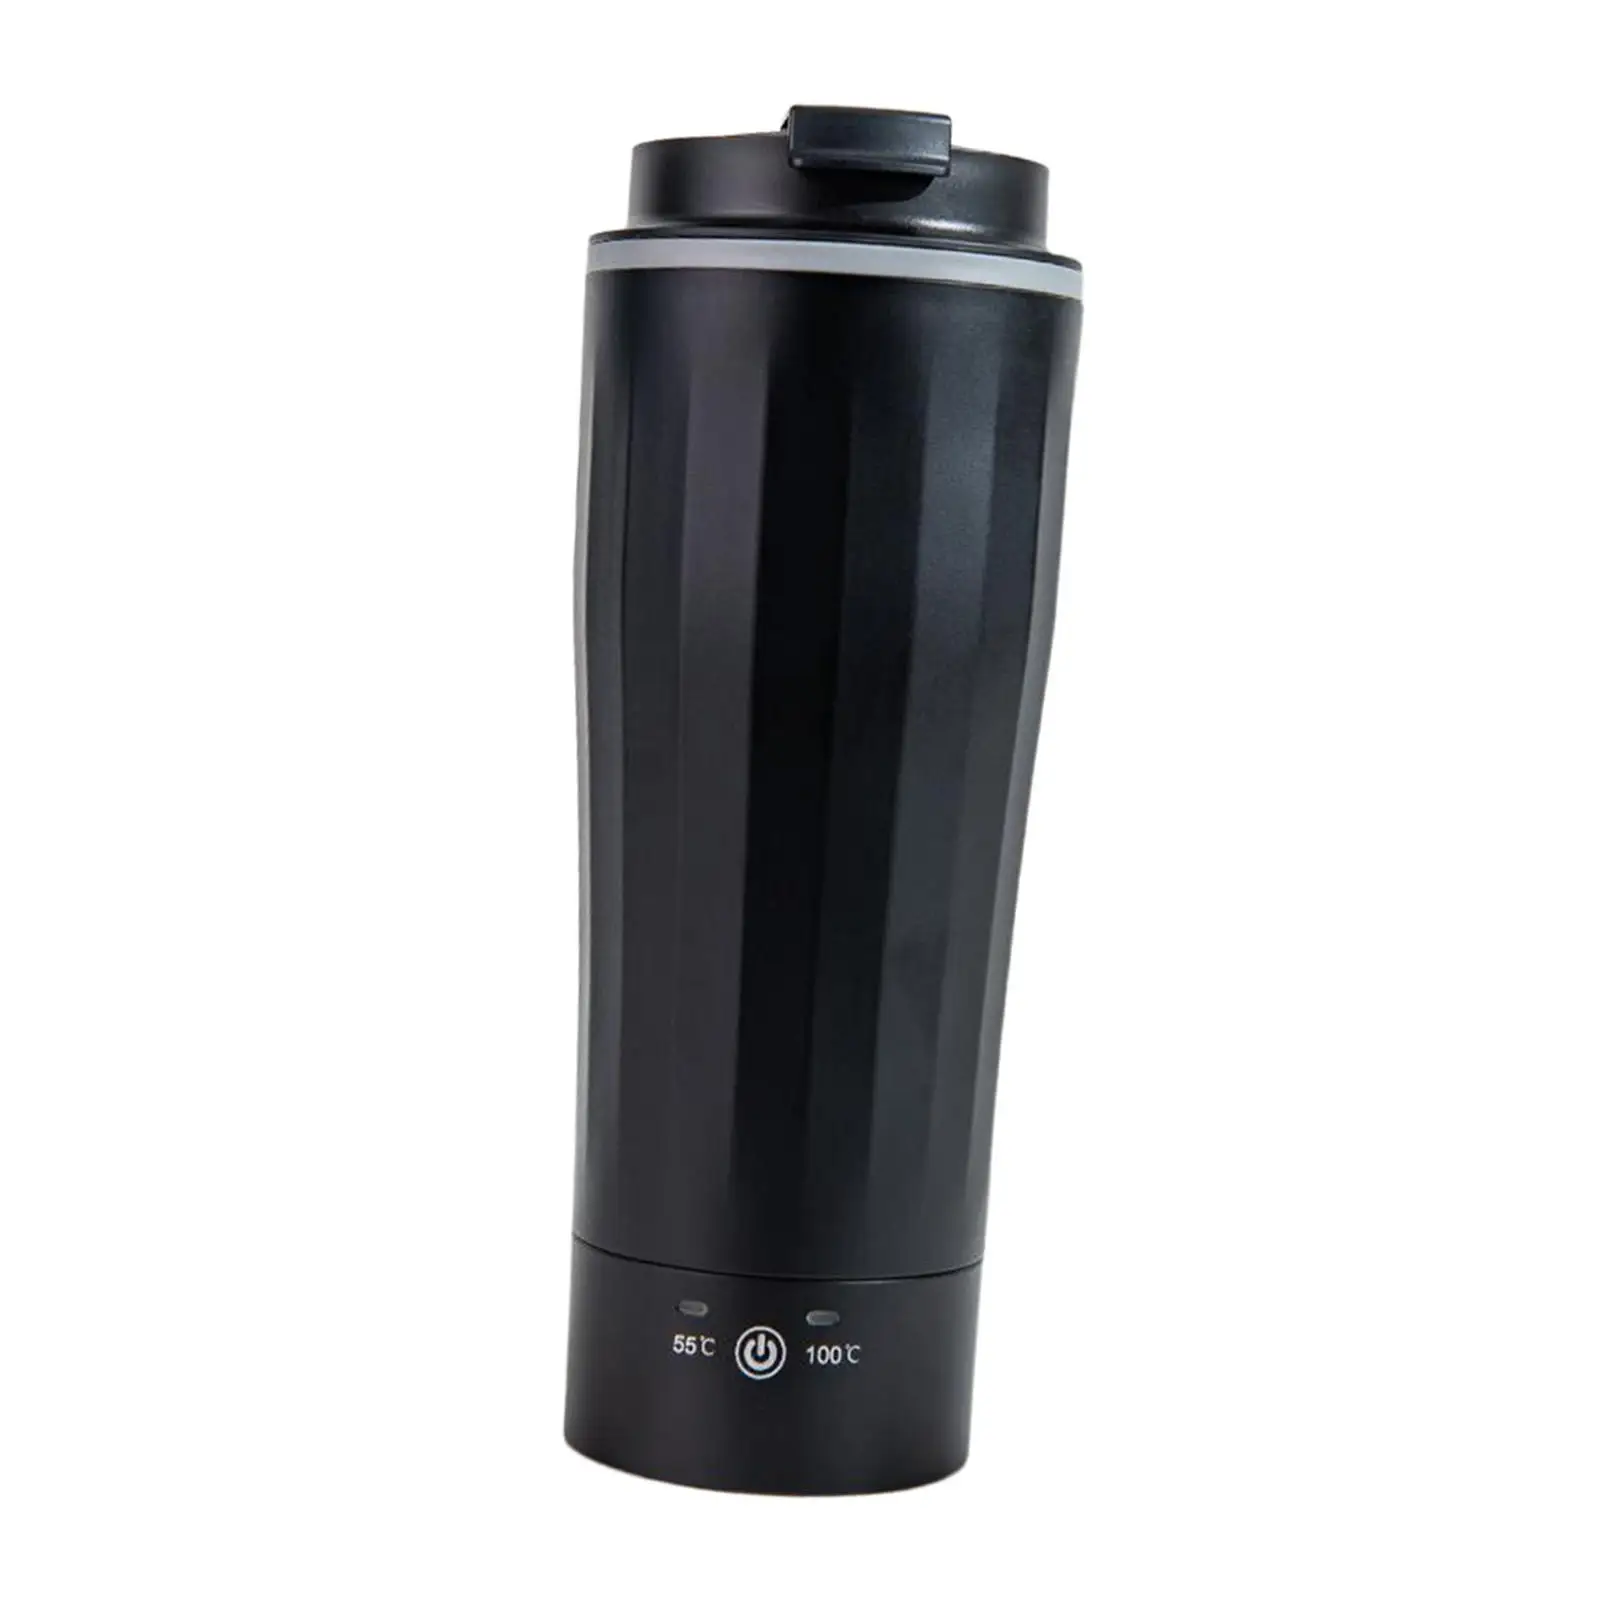 Car Heating Cup Portable Kettle 500ml Travel Mug Car Electric Kettle for Milk Heated Brewing Coffee Heating Water Outdoor